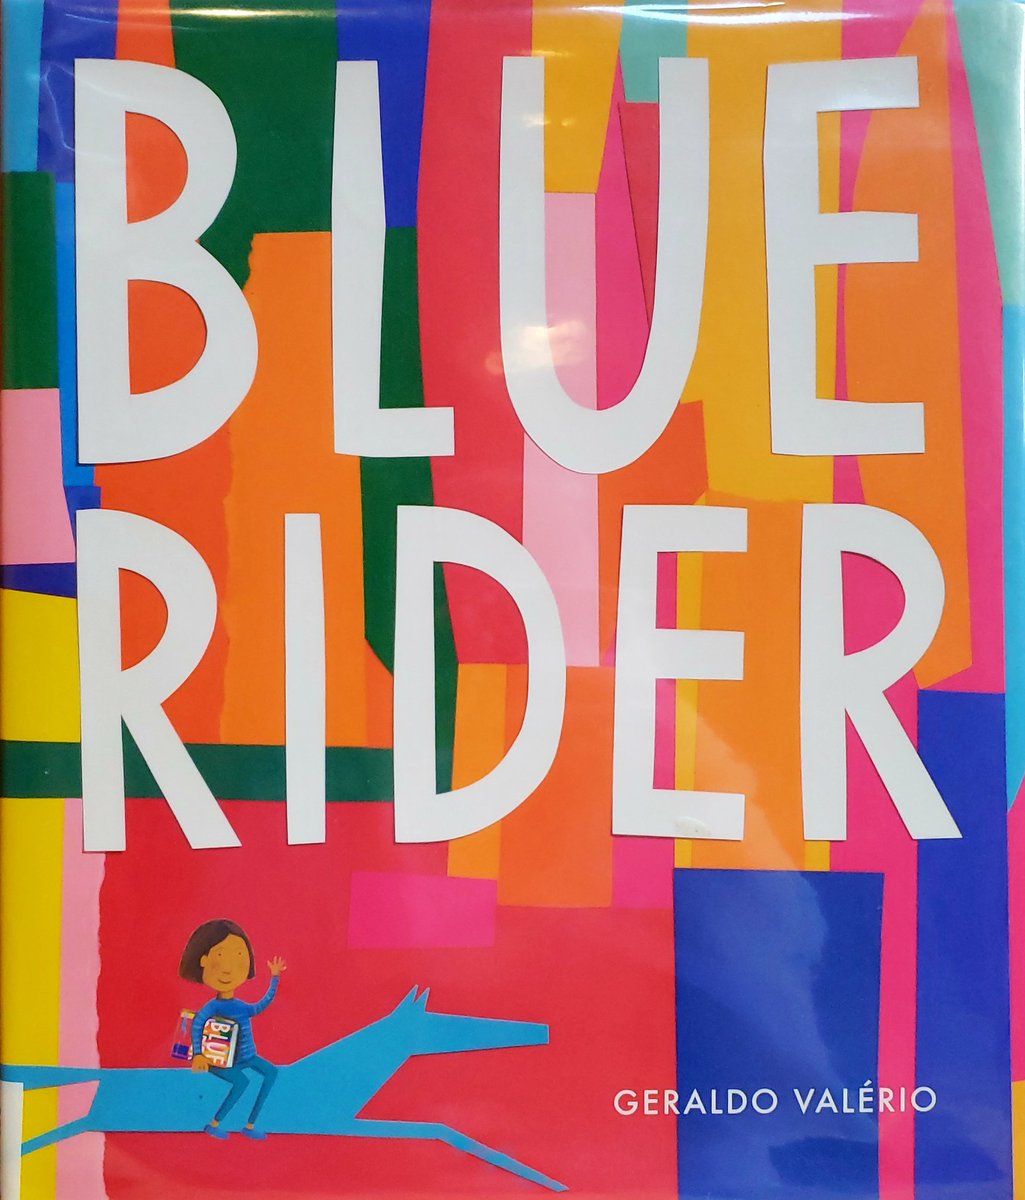 🏙 BLUE RIDER -  In this wordless #pb a young girl finds a book on a crowded city sidewalk. That night, she reads her book and is instantly transported out of her urban life into a world of color & beauty.❤ #kidlit  @GroundwoodBooks #picturebook #childrensbooks #GeraldoValerio